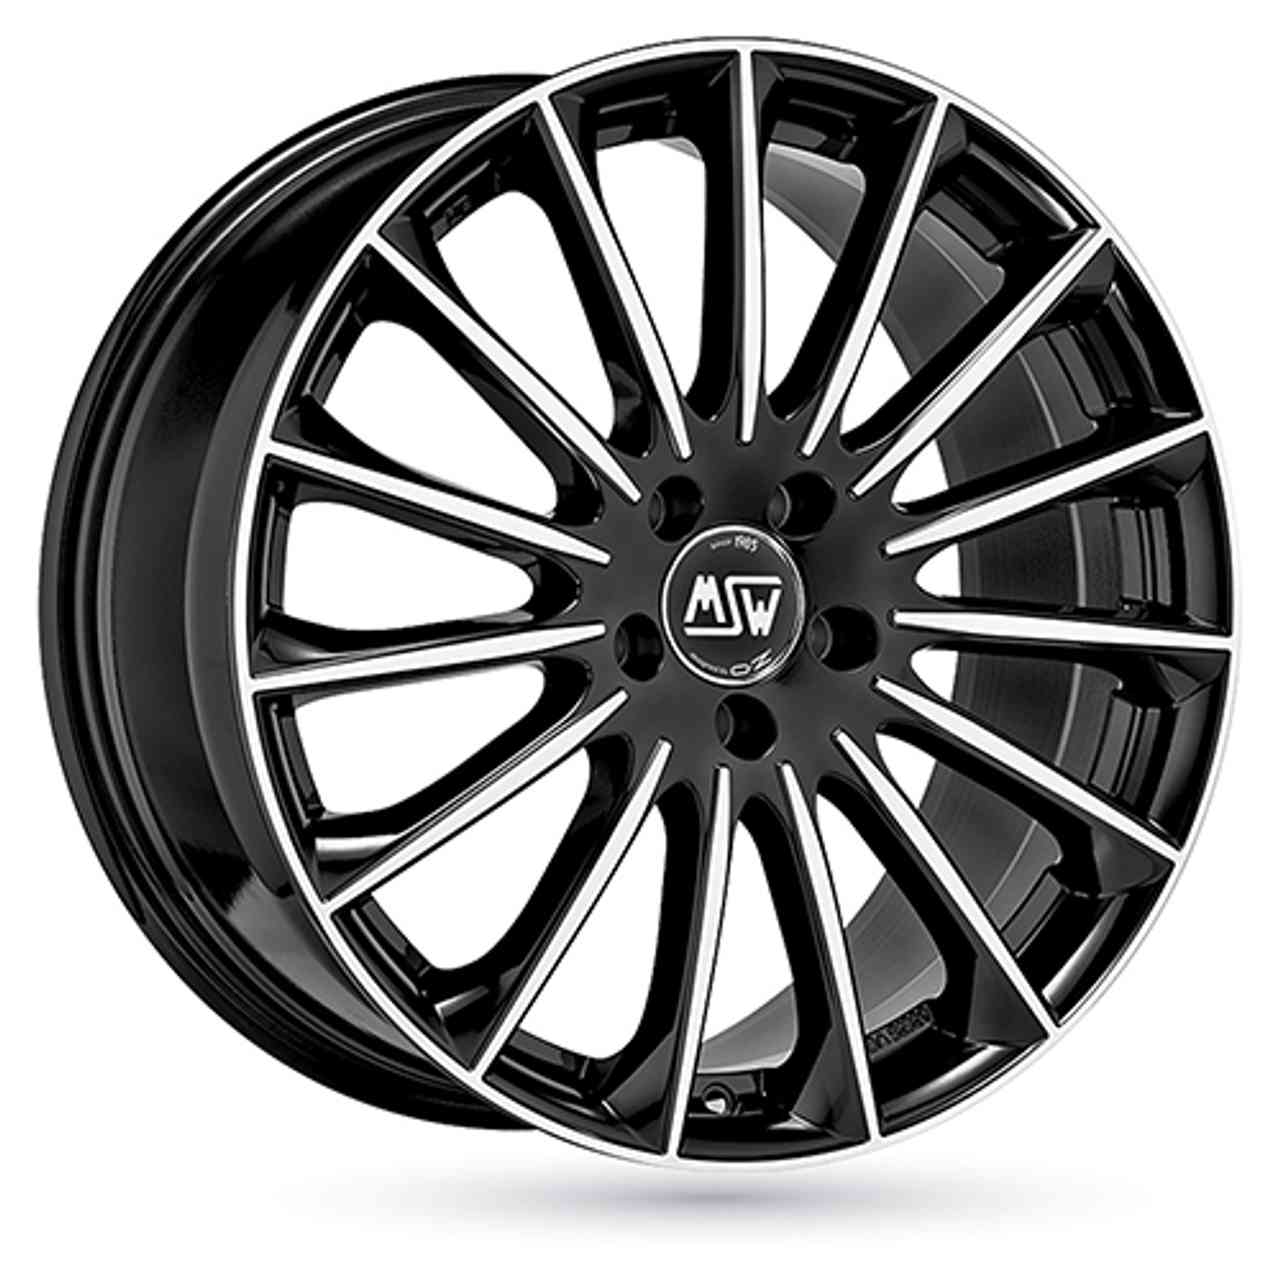 MSW (OZ) MSW 30 gloss black full polished 8.0Jx18 5x110 ET30